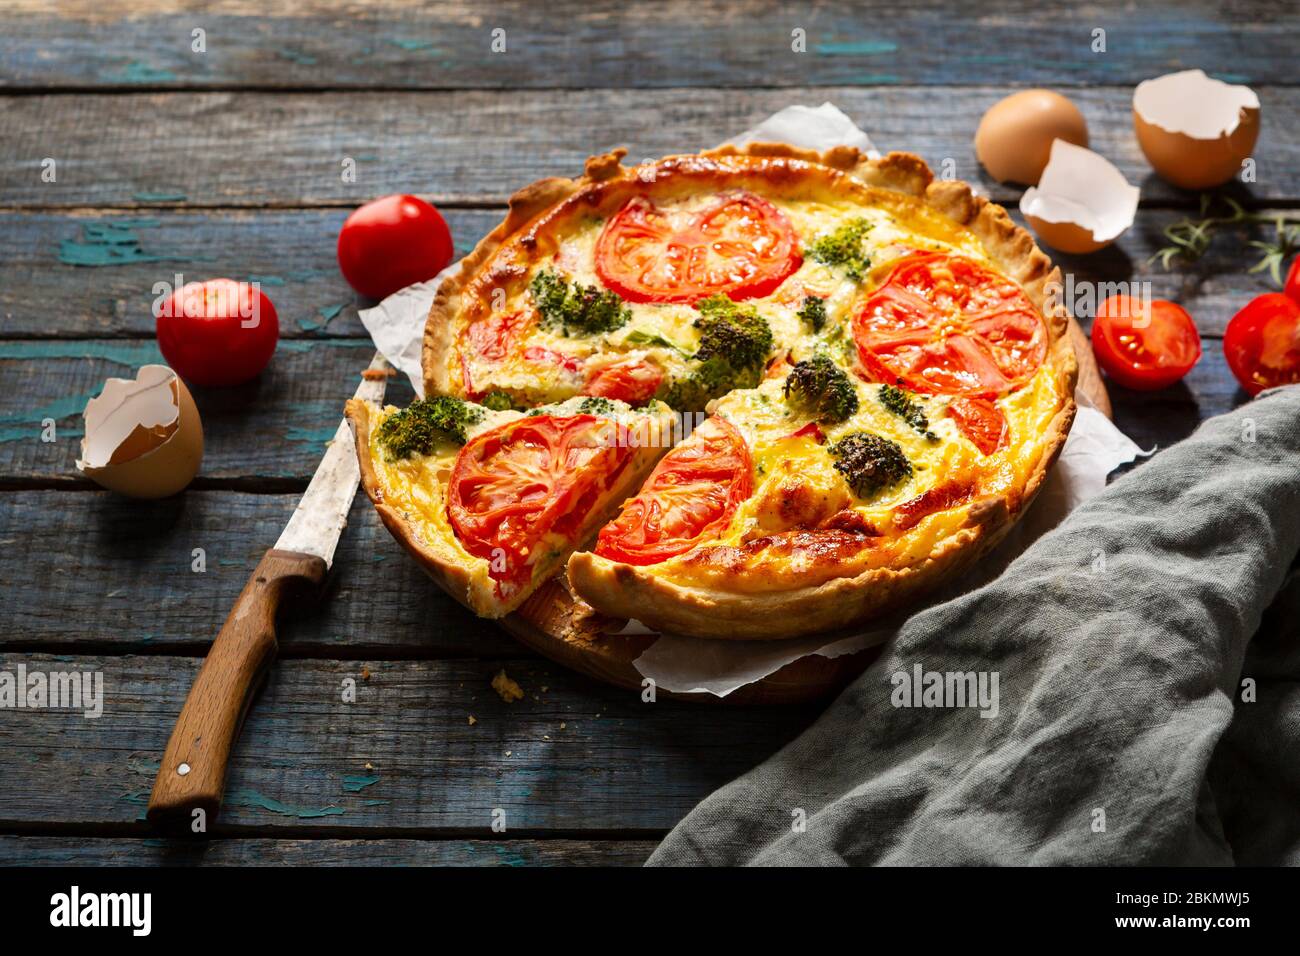 Quiche lorraine with broccoli and cheese on  wooden background. Stock Photo